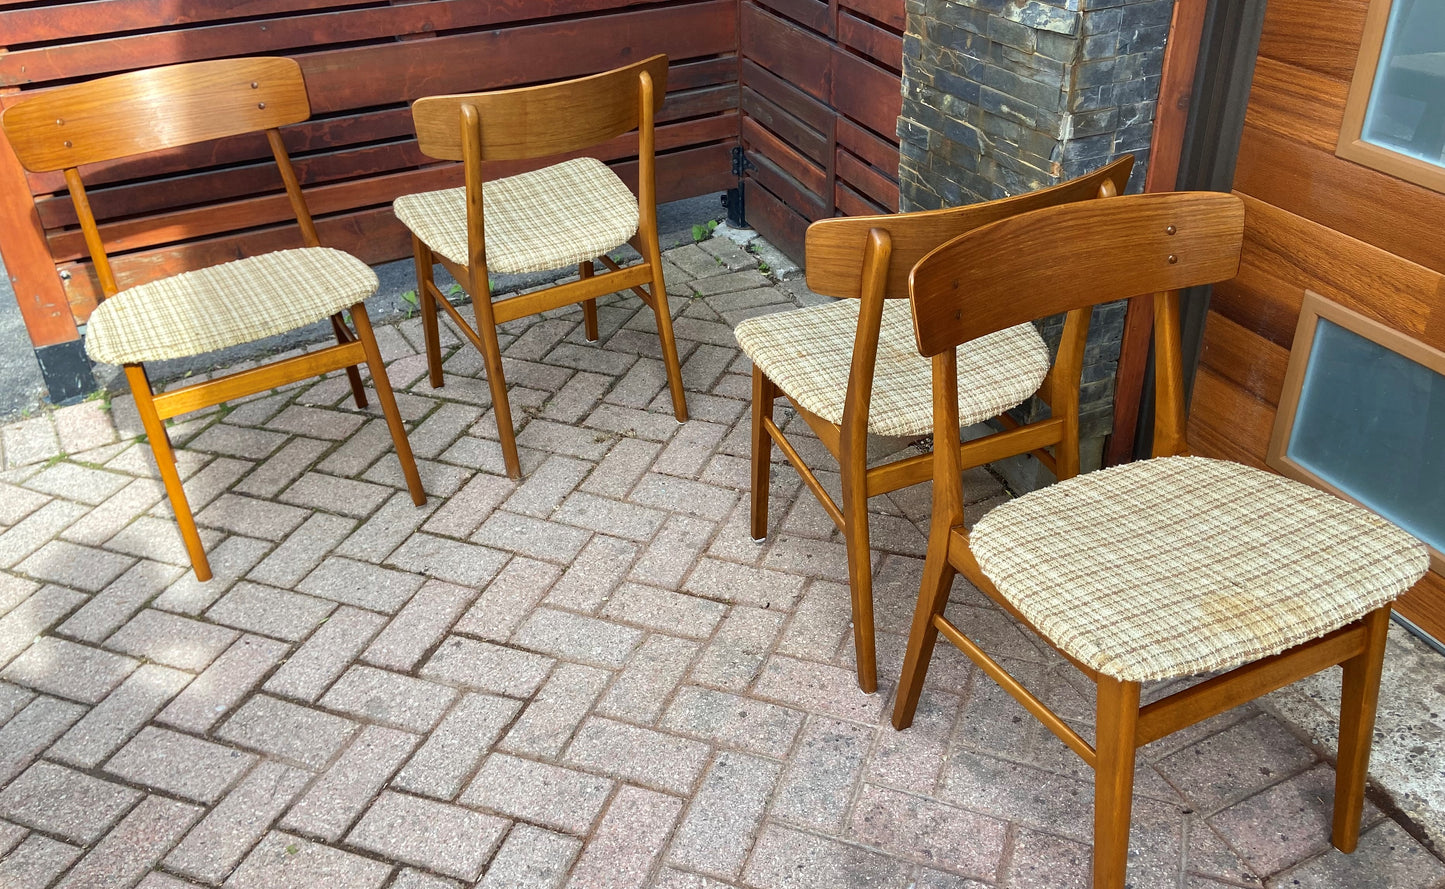 4 Danish Mid Century Modern Teak Chairs by Farstrup, will be REUPHOLSTERED